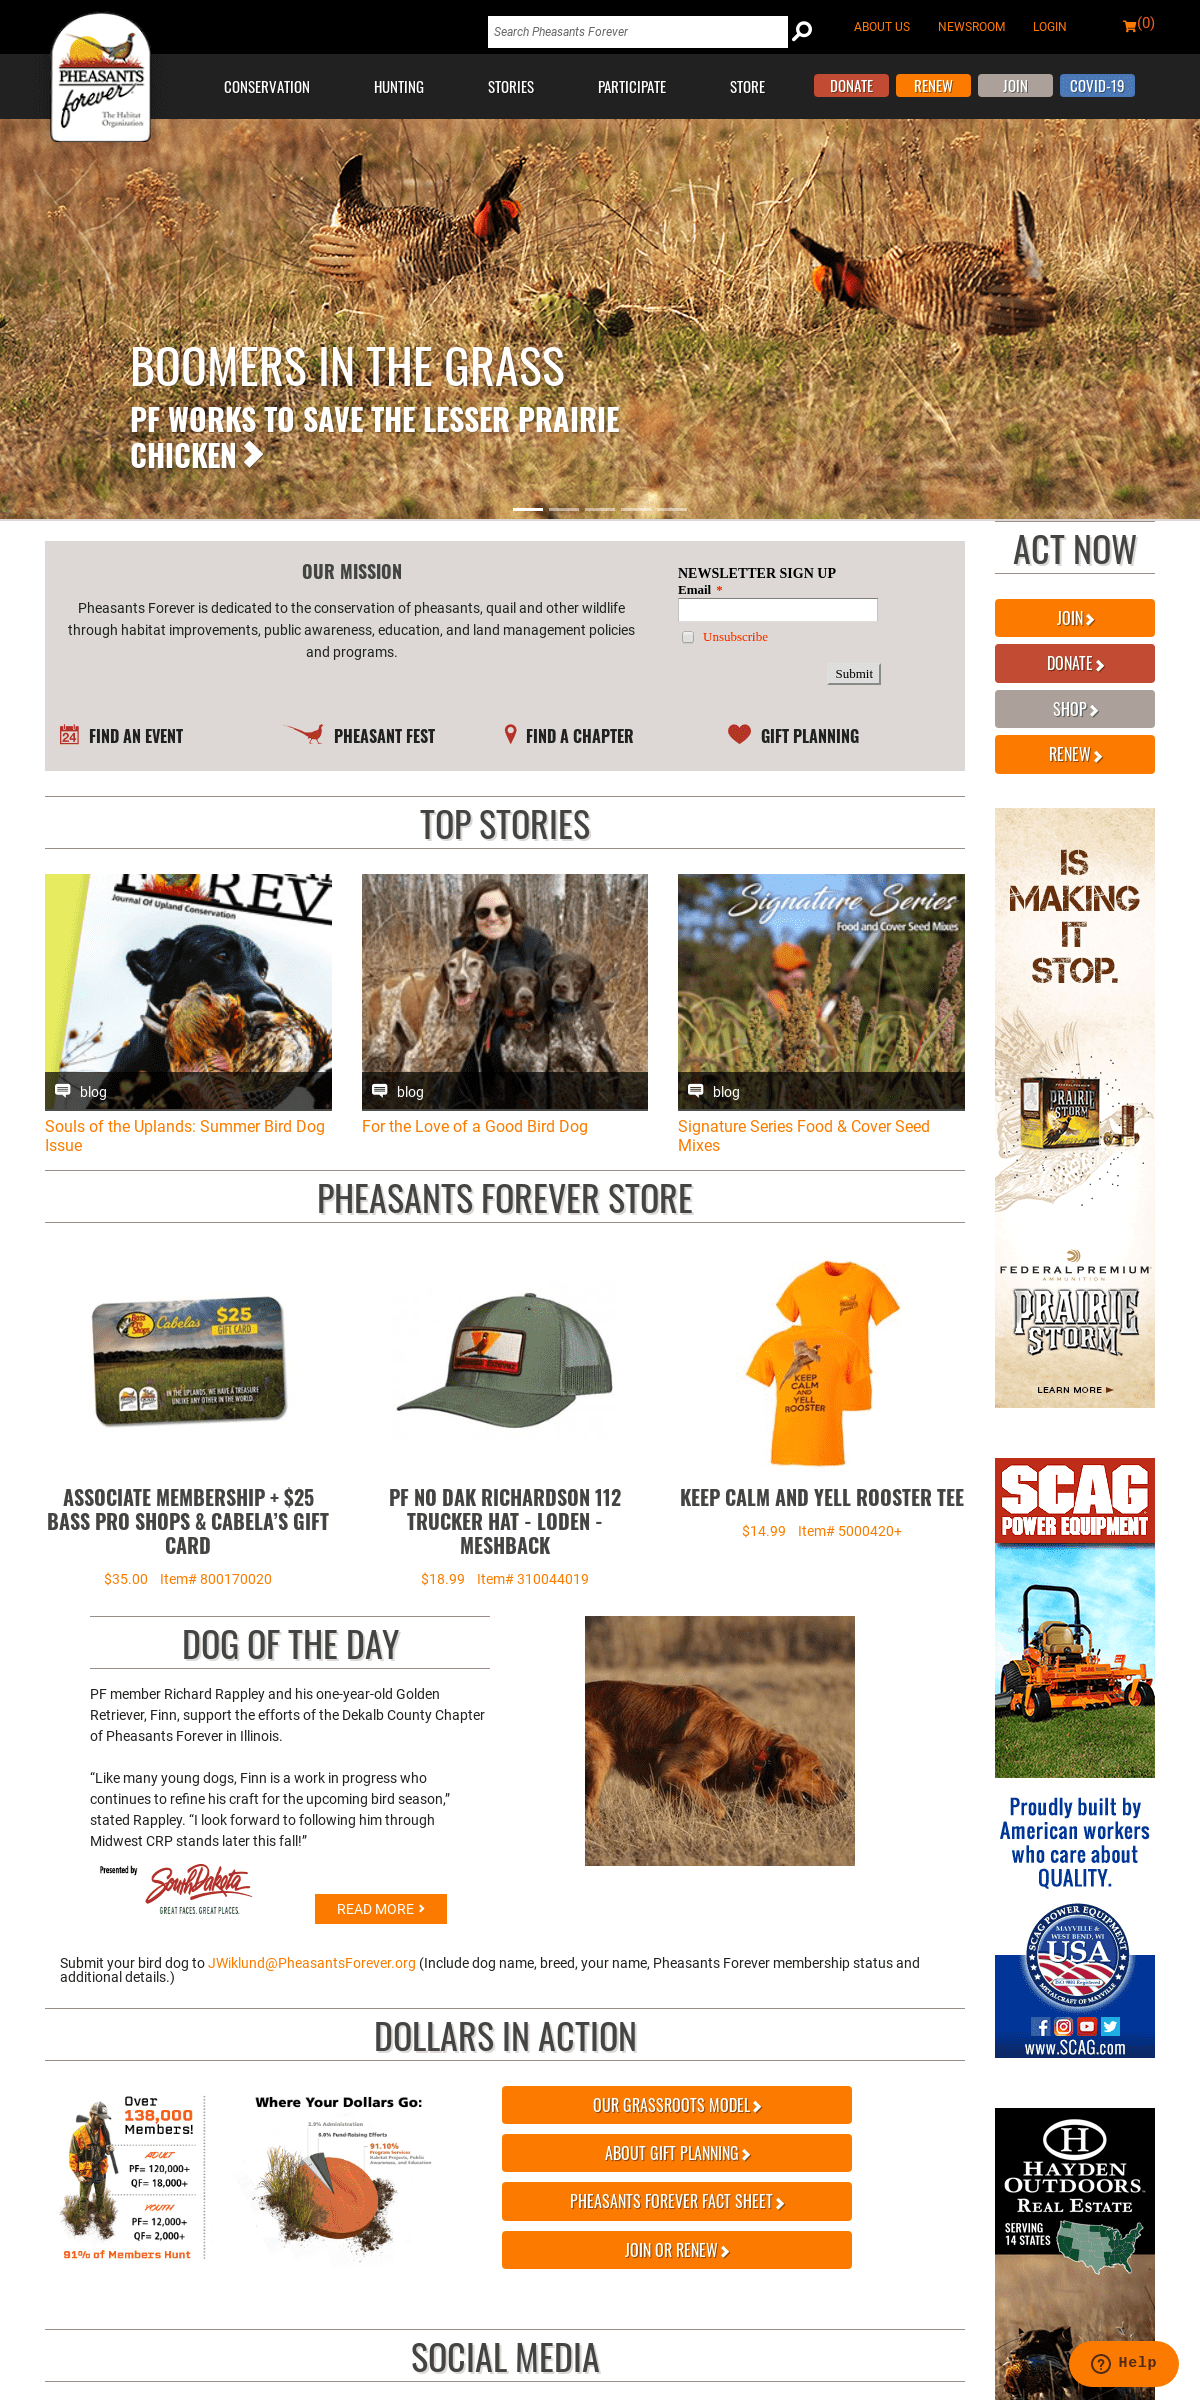 A complete backup of pheasantsforever.org